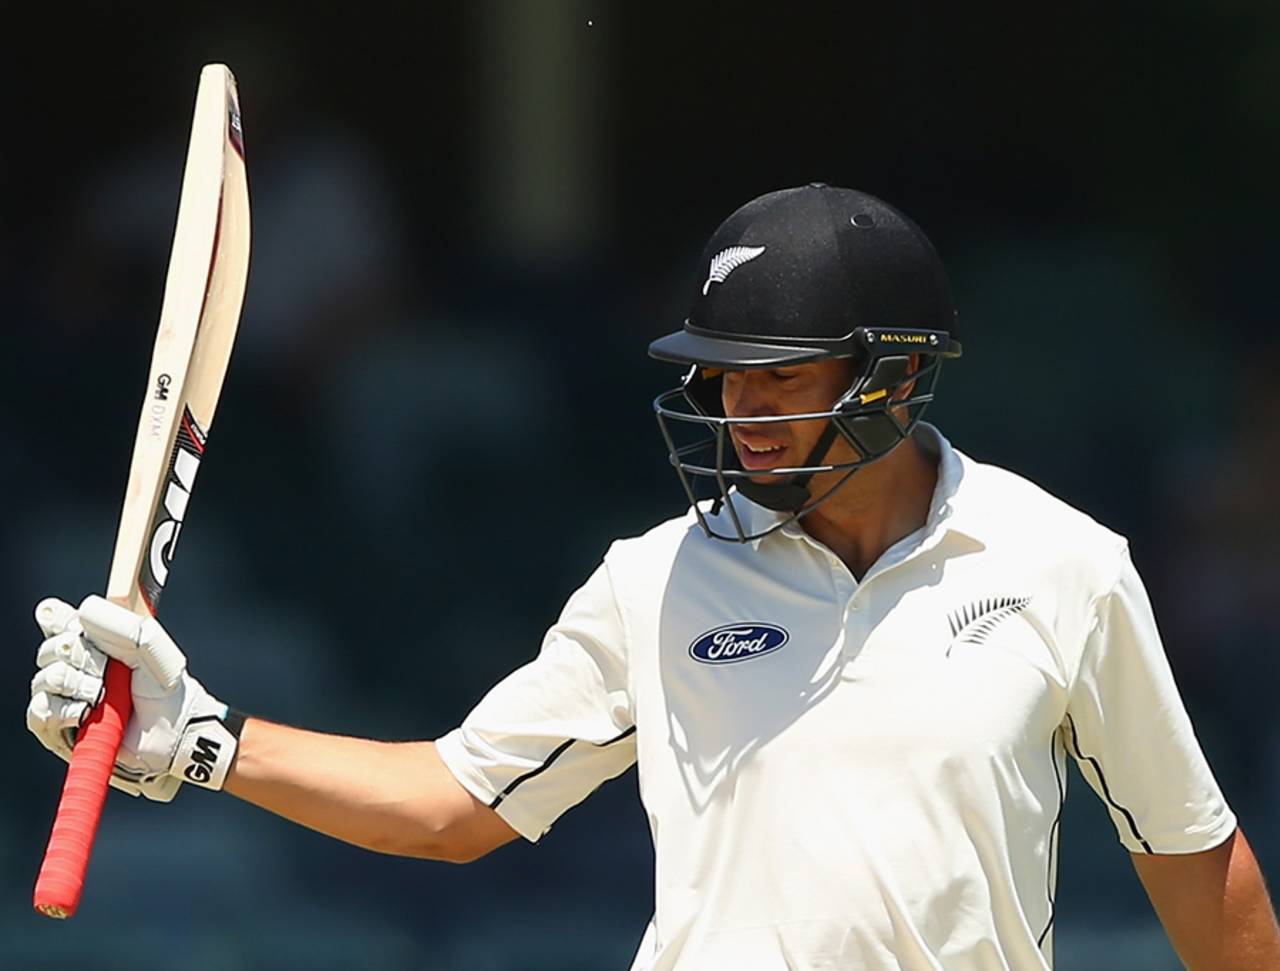 Ross Taylor scored 290 against Australia last month, the highest score by a New Zealand batsman in away Tests&nbsp;&nbsp;&bull;&nbsp;&nbsp;Getty Images